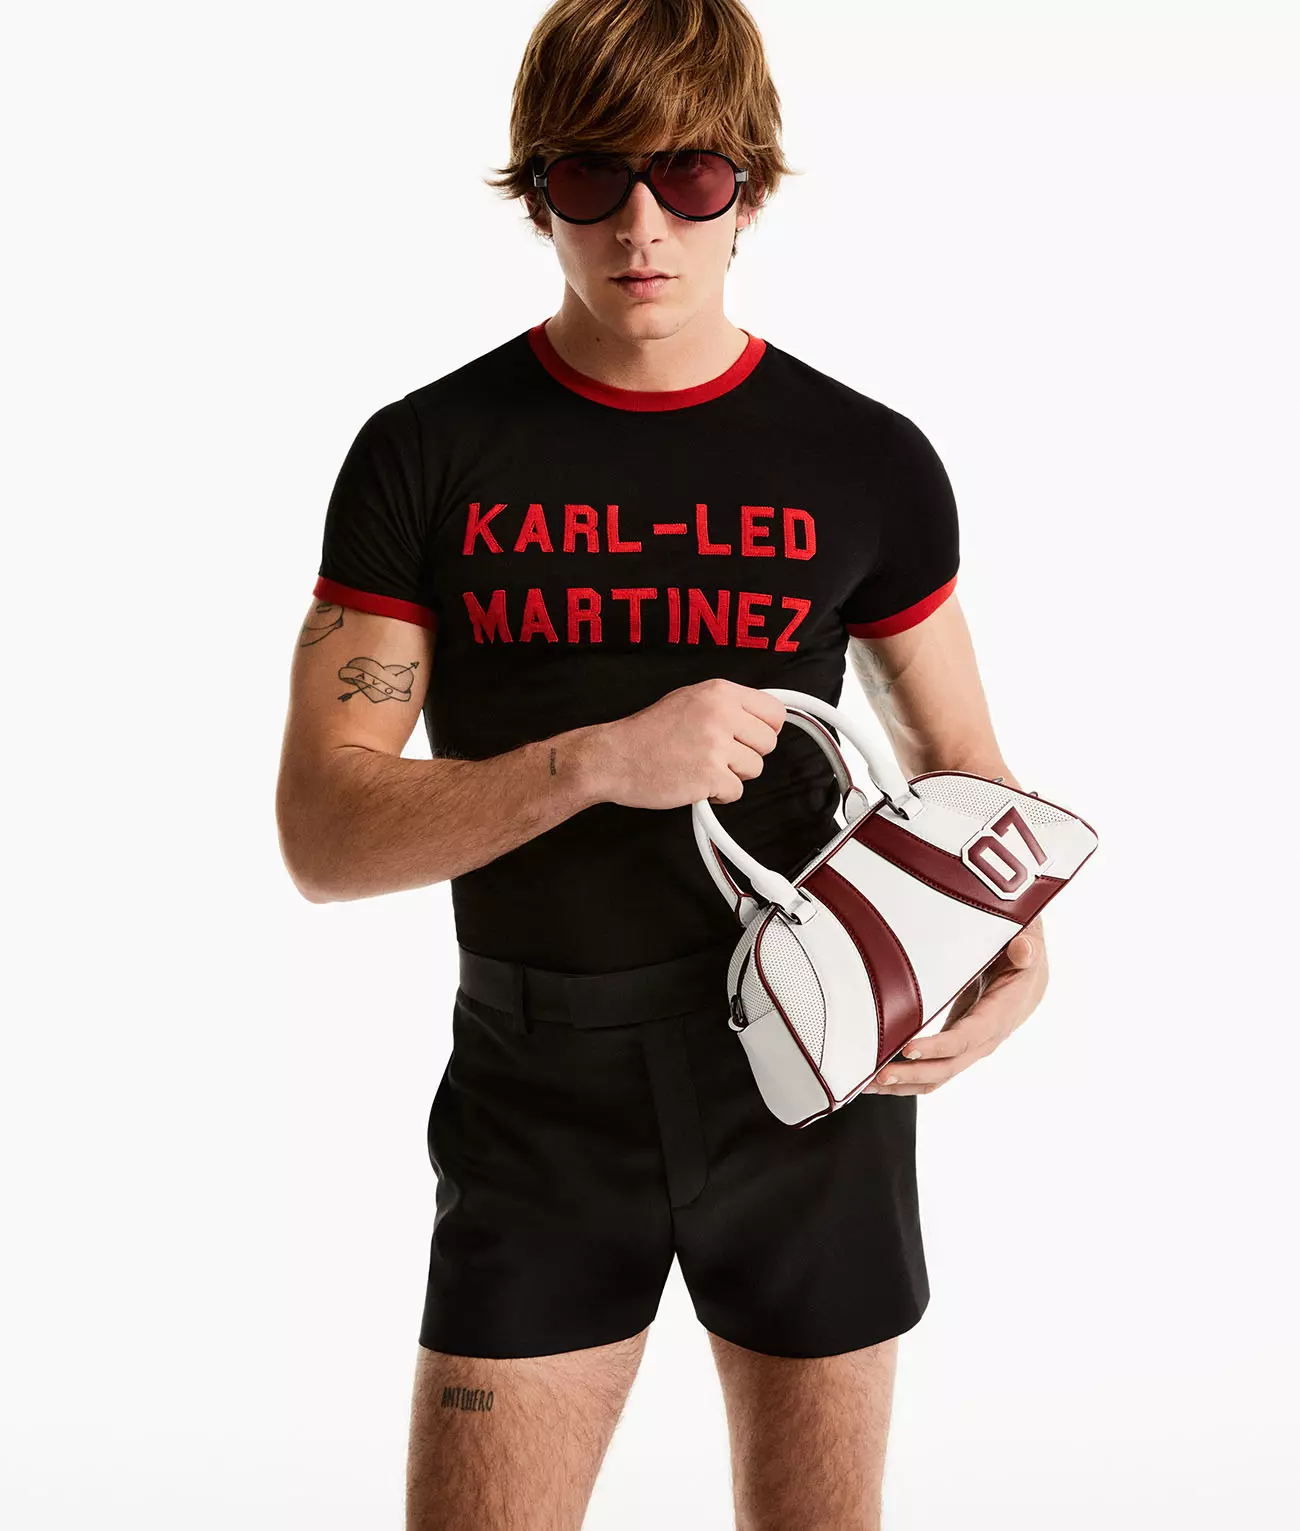 Karl Lagerfeld x Alled-Martinez, an ode to the “queer perspective”